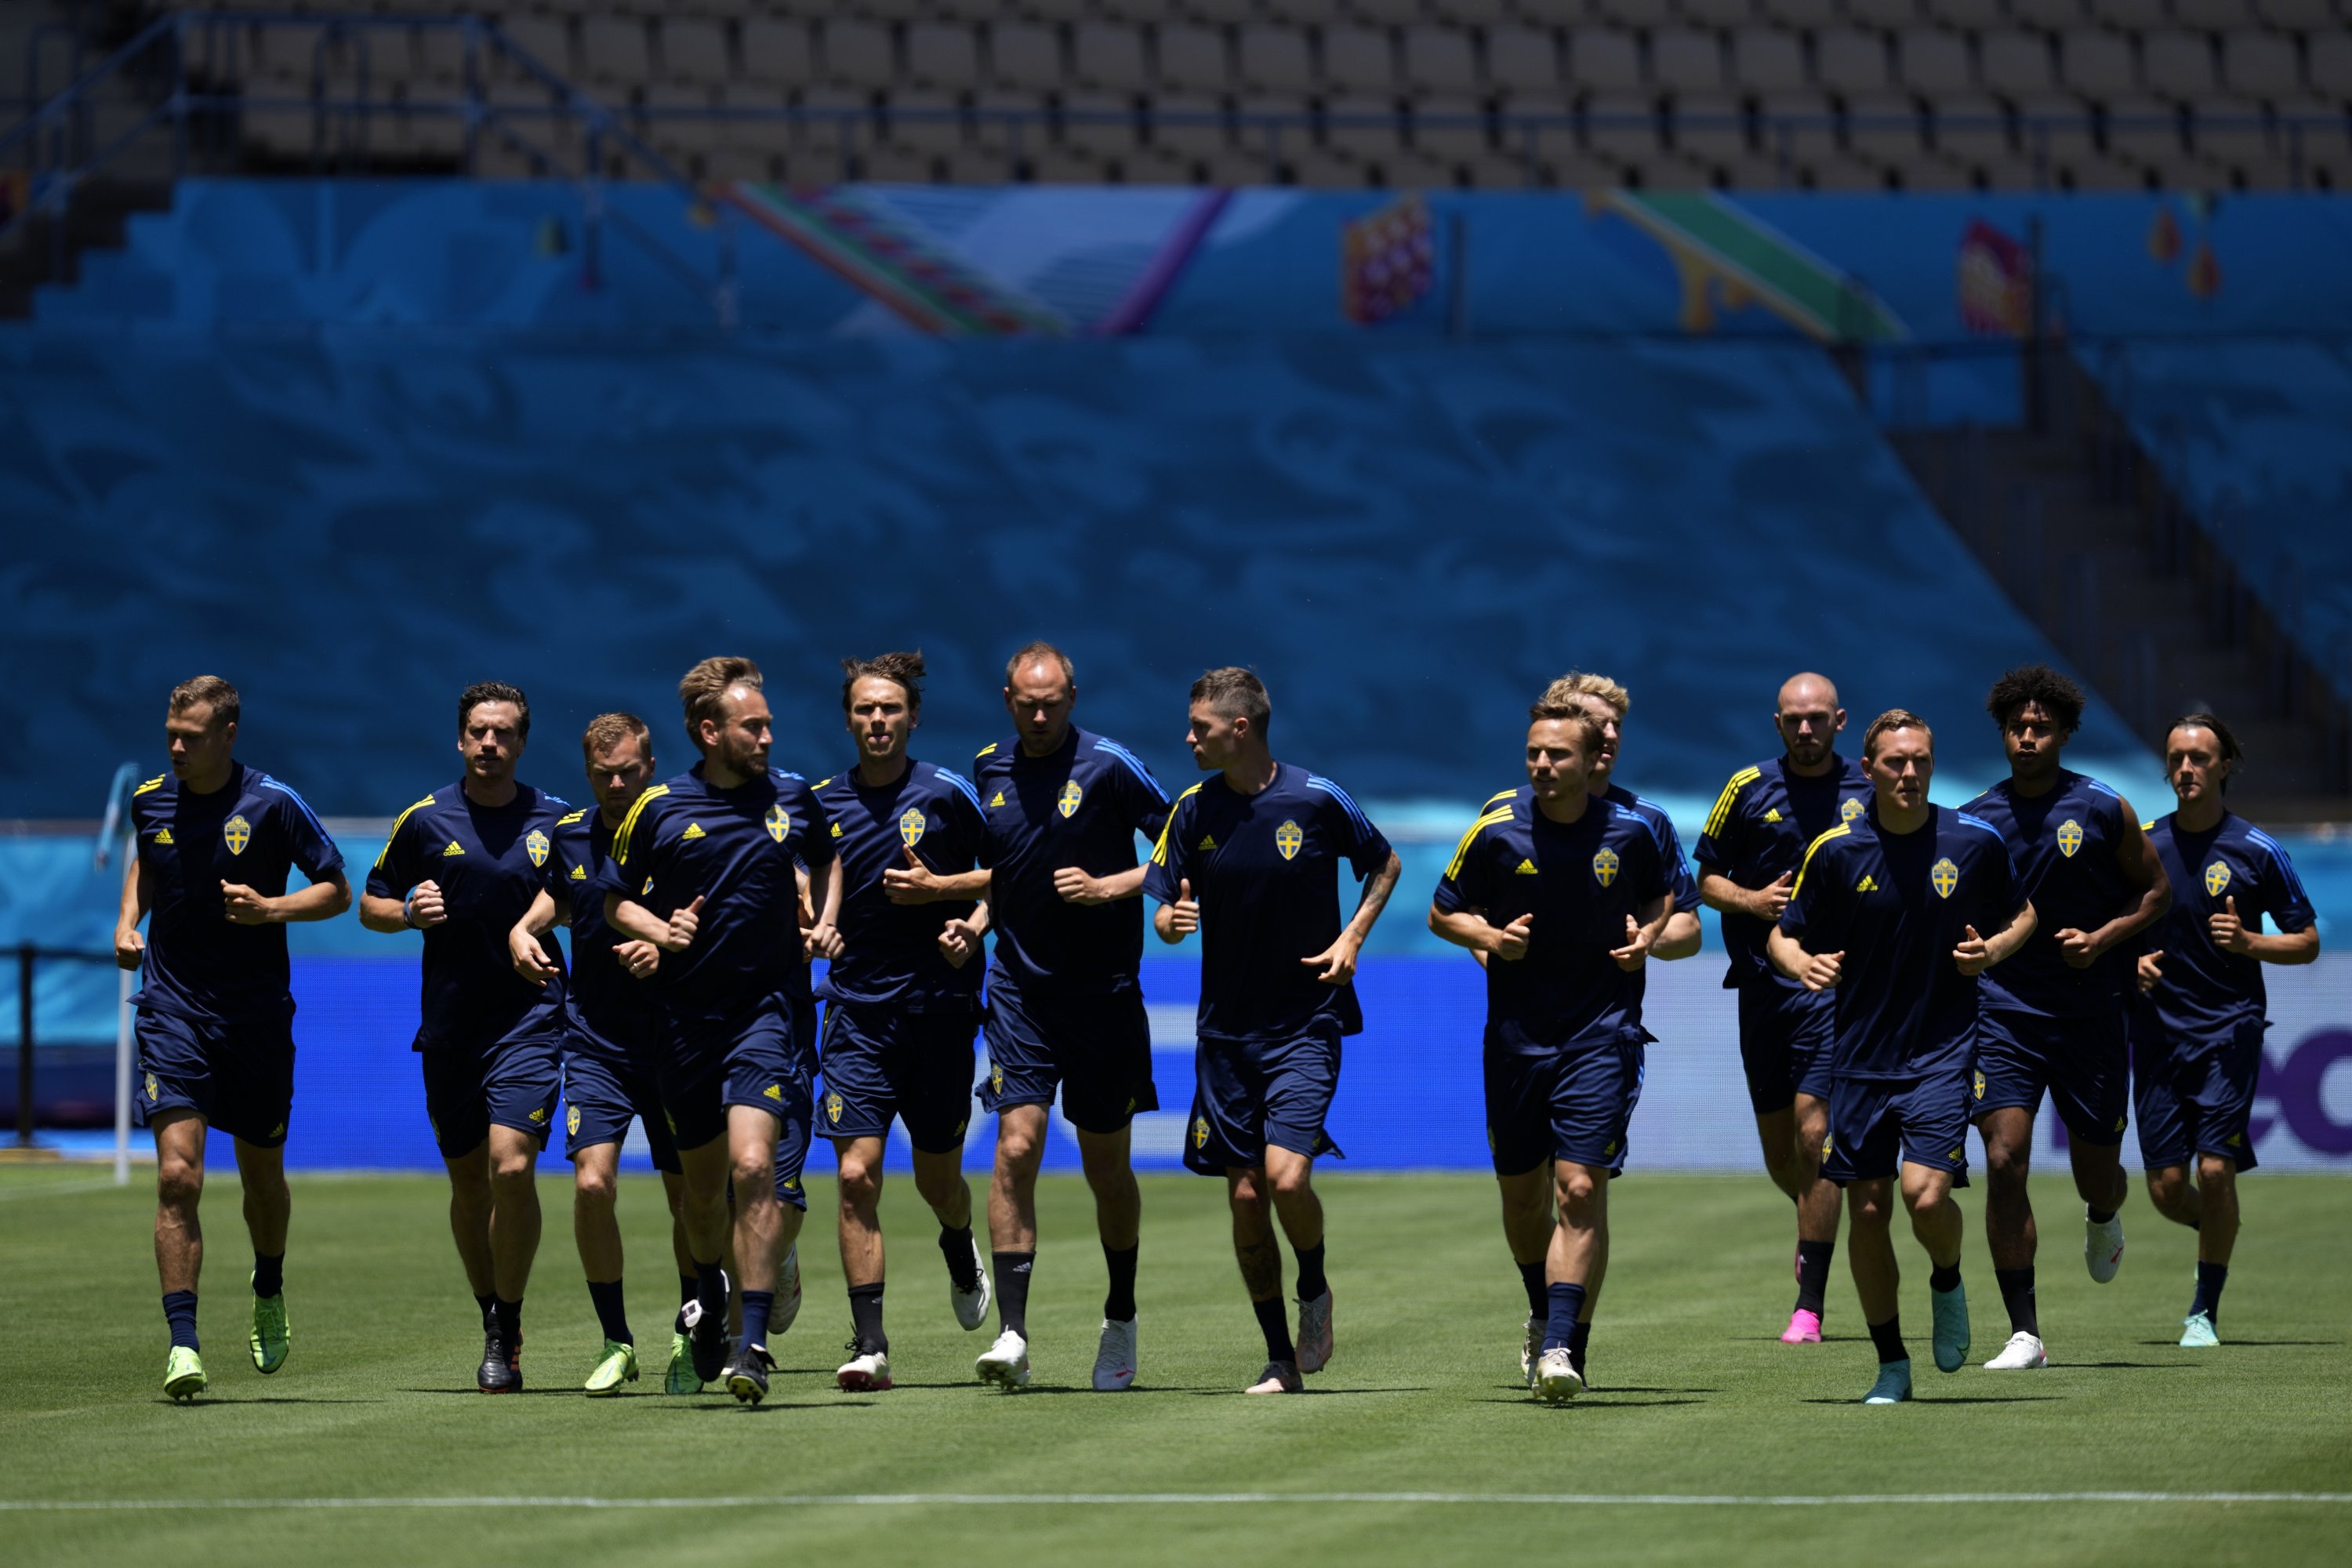 Swedish players run during a training session at the La Cartuja stadium in Seville, Spain, June 13, 2021. (AP Photo)